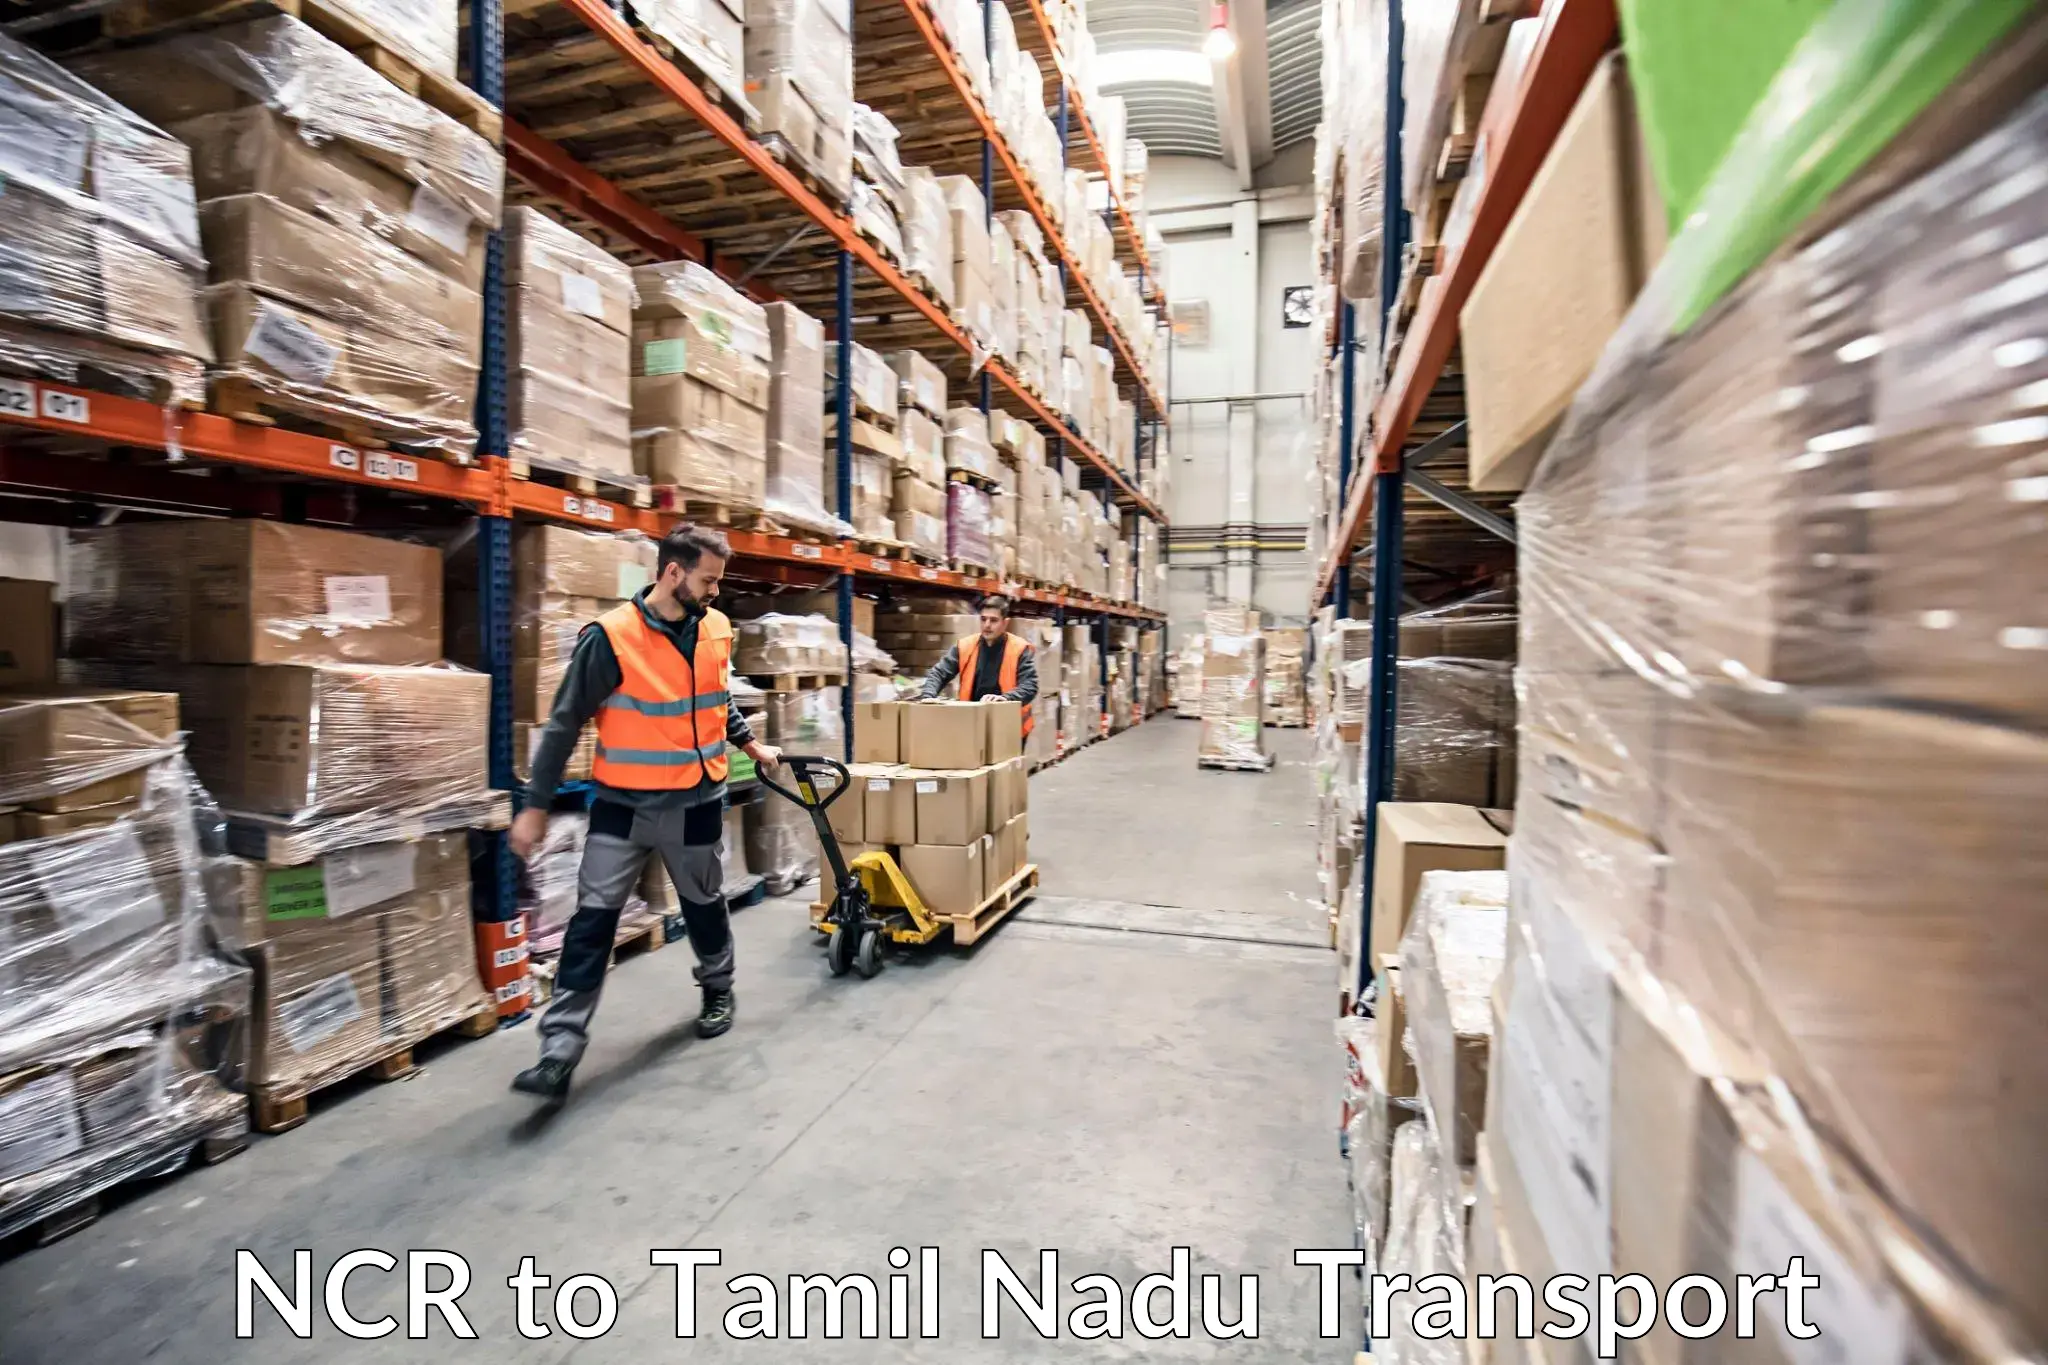 Door to door transport services NCR to Ennore Port Chennai